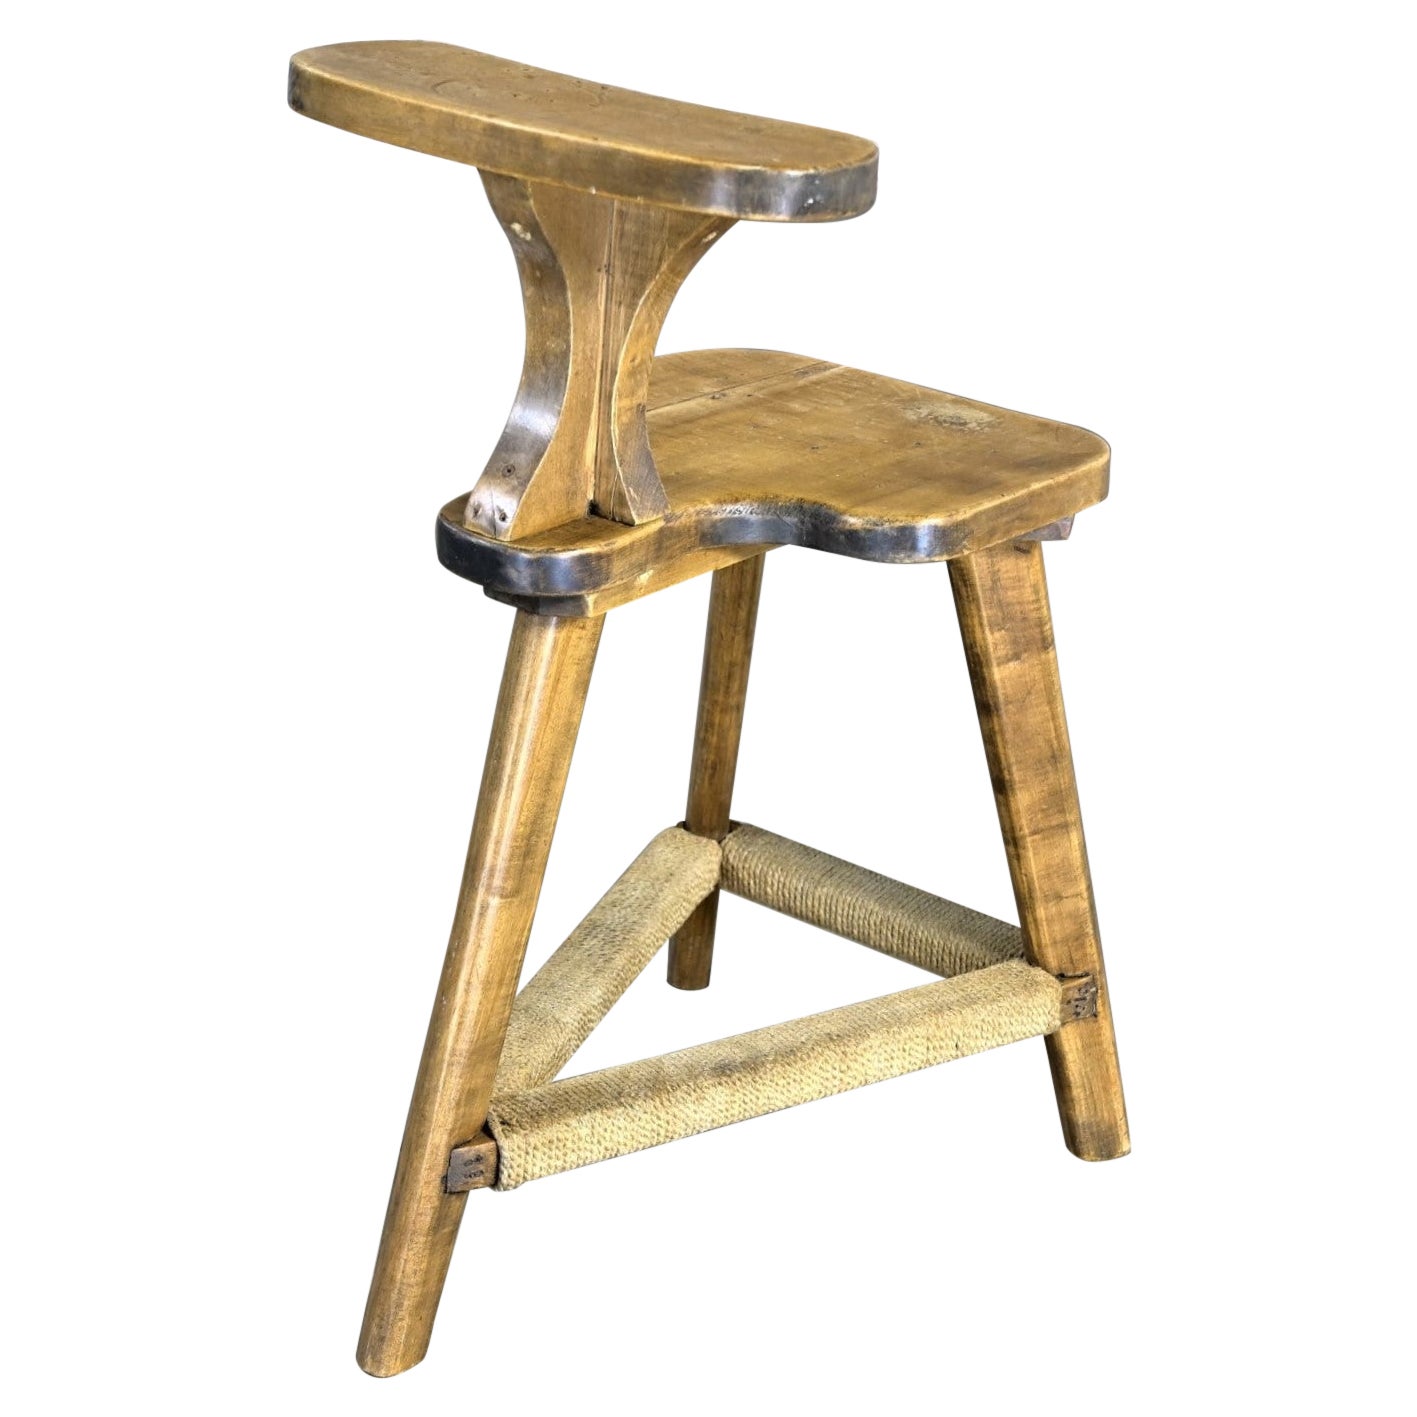 Rustic Distressed Maple Cockfighting Betting or Sporting Chair Tri-Leg Base For Sale